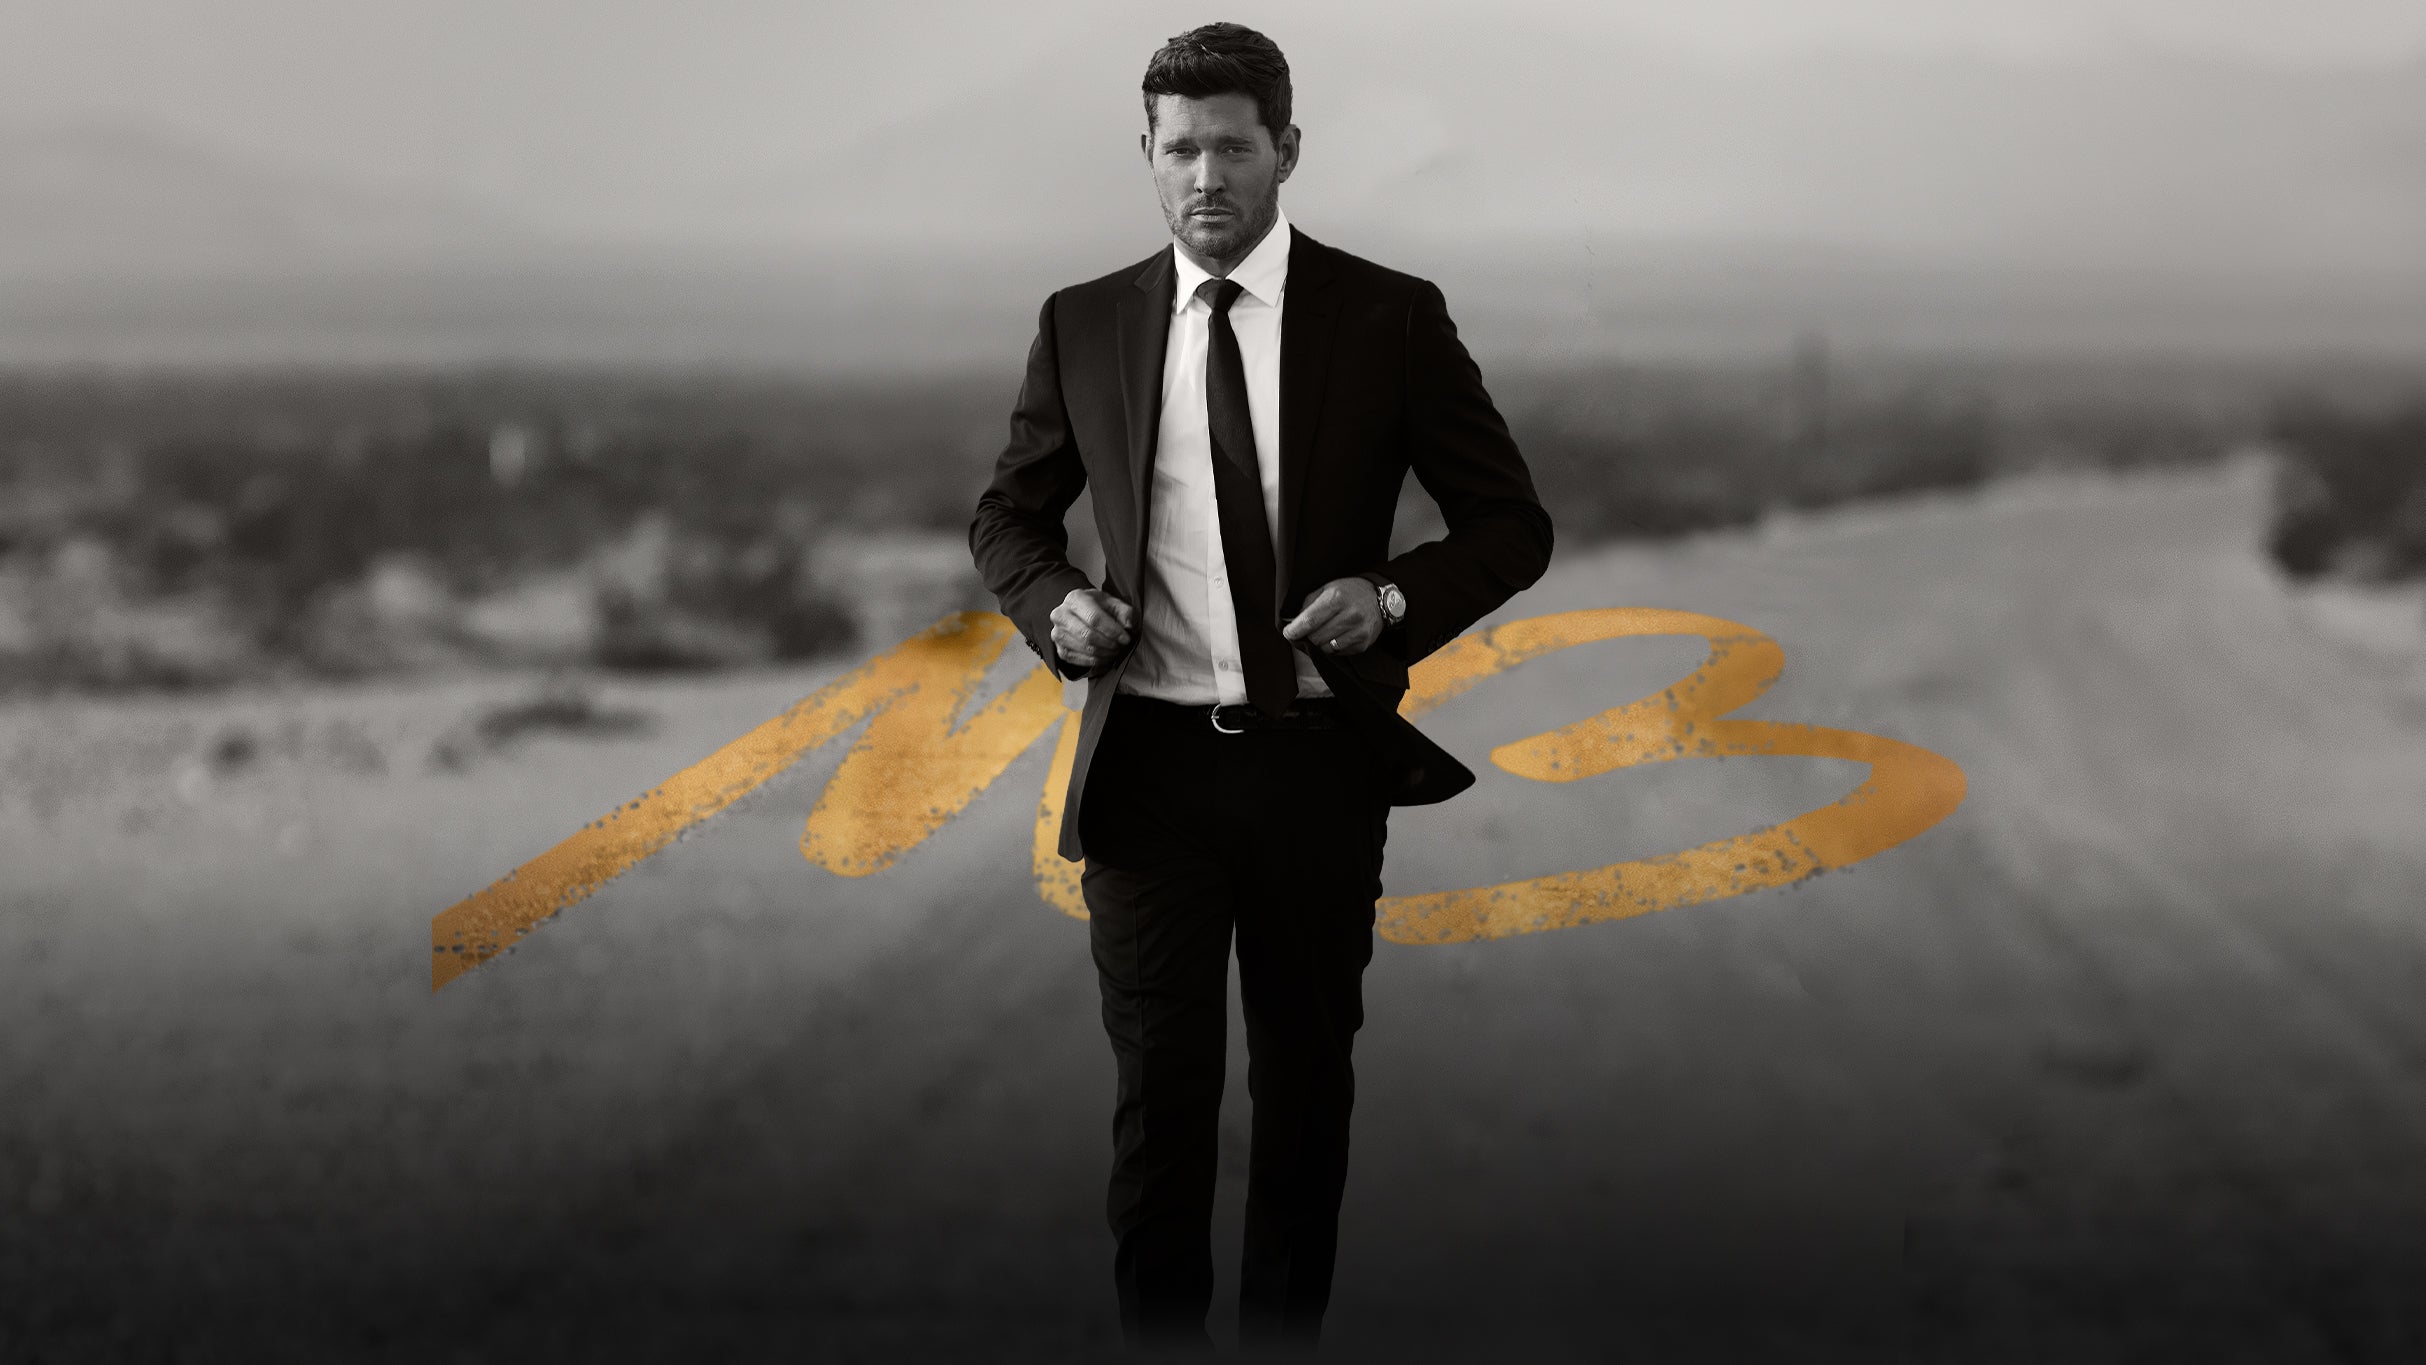 An Evening with Michael Bublé at PPG Paints Arena